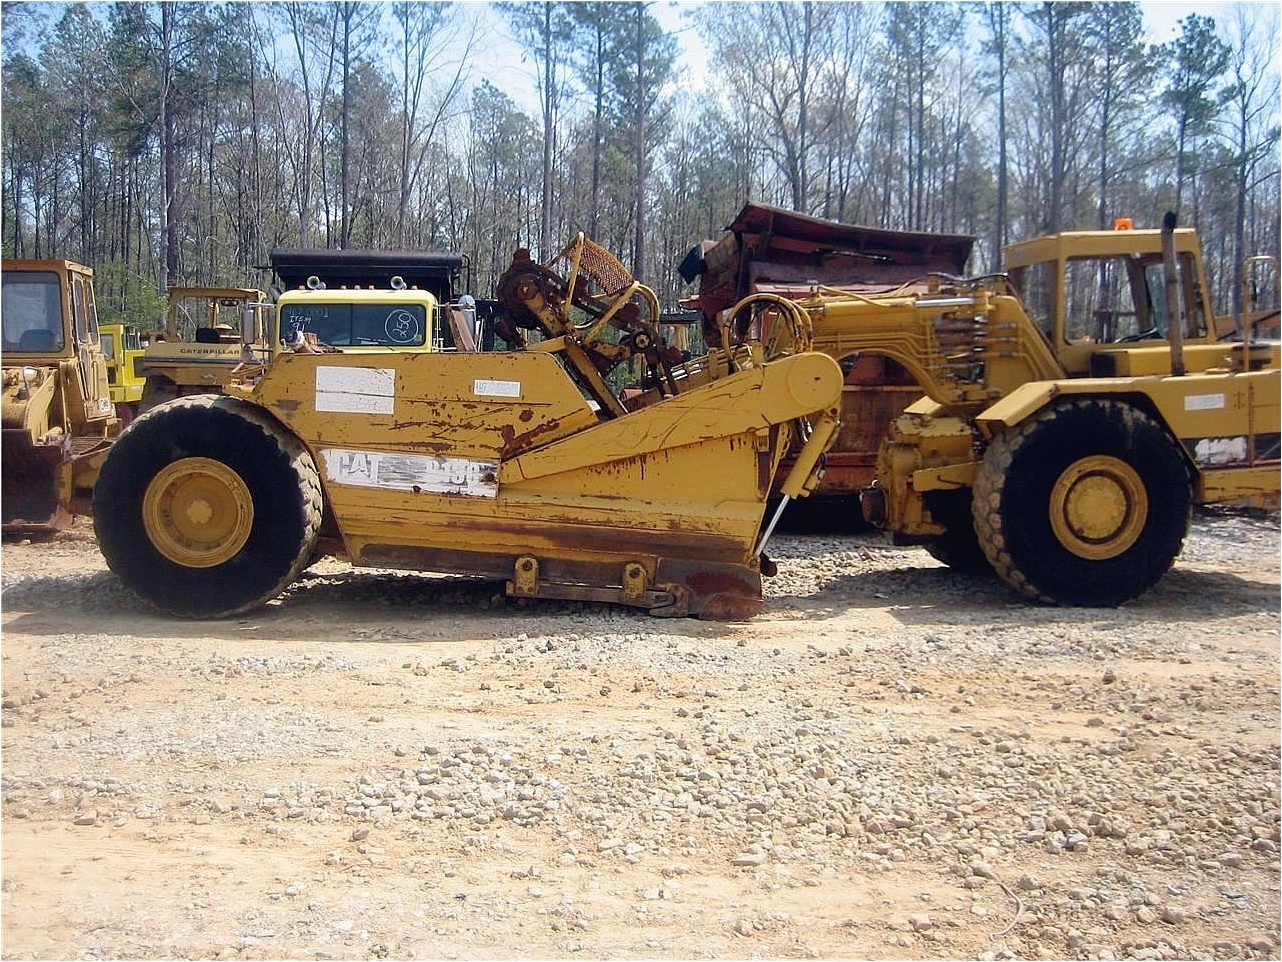 Used Scrapers caterpillar machines for sale. Find 627g ...